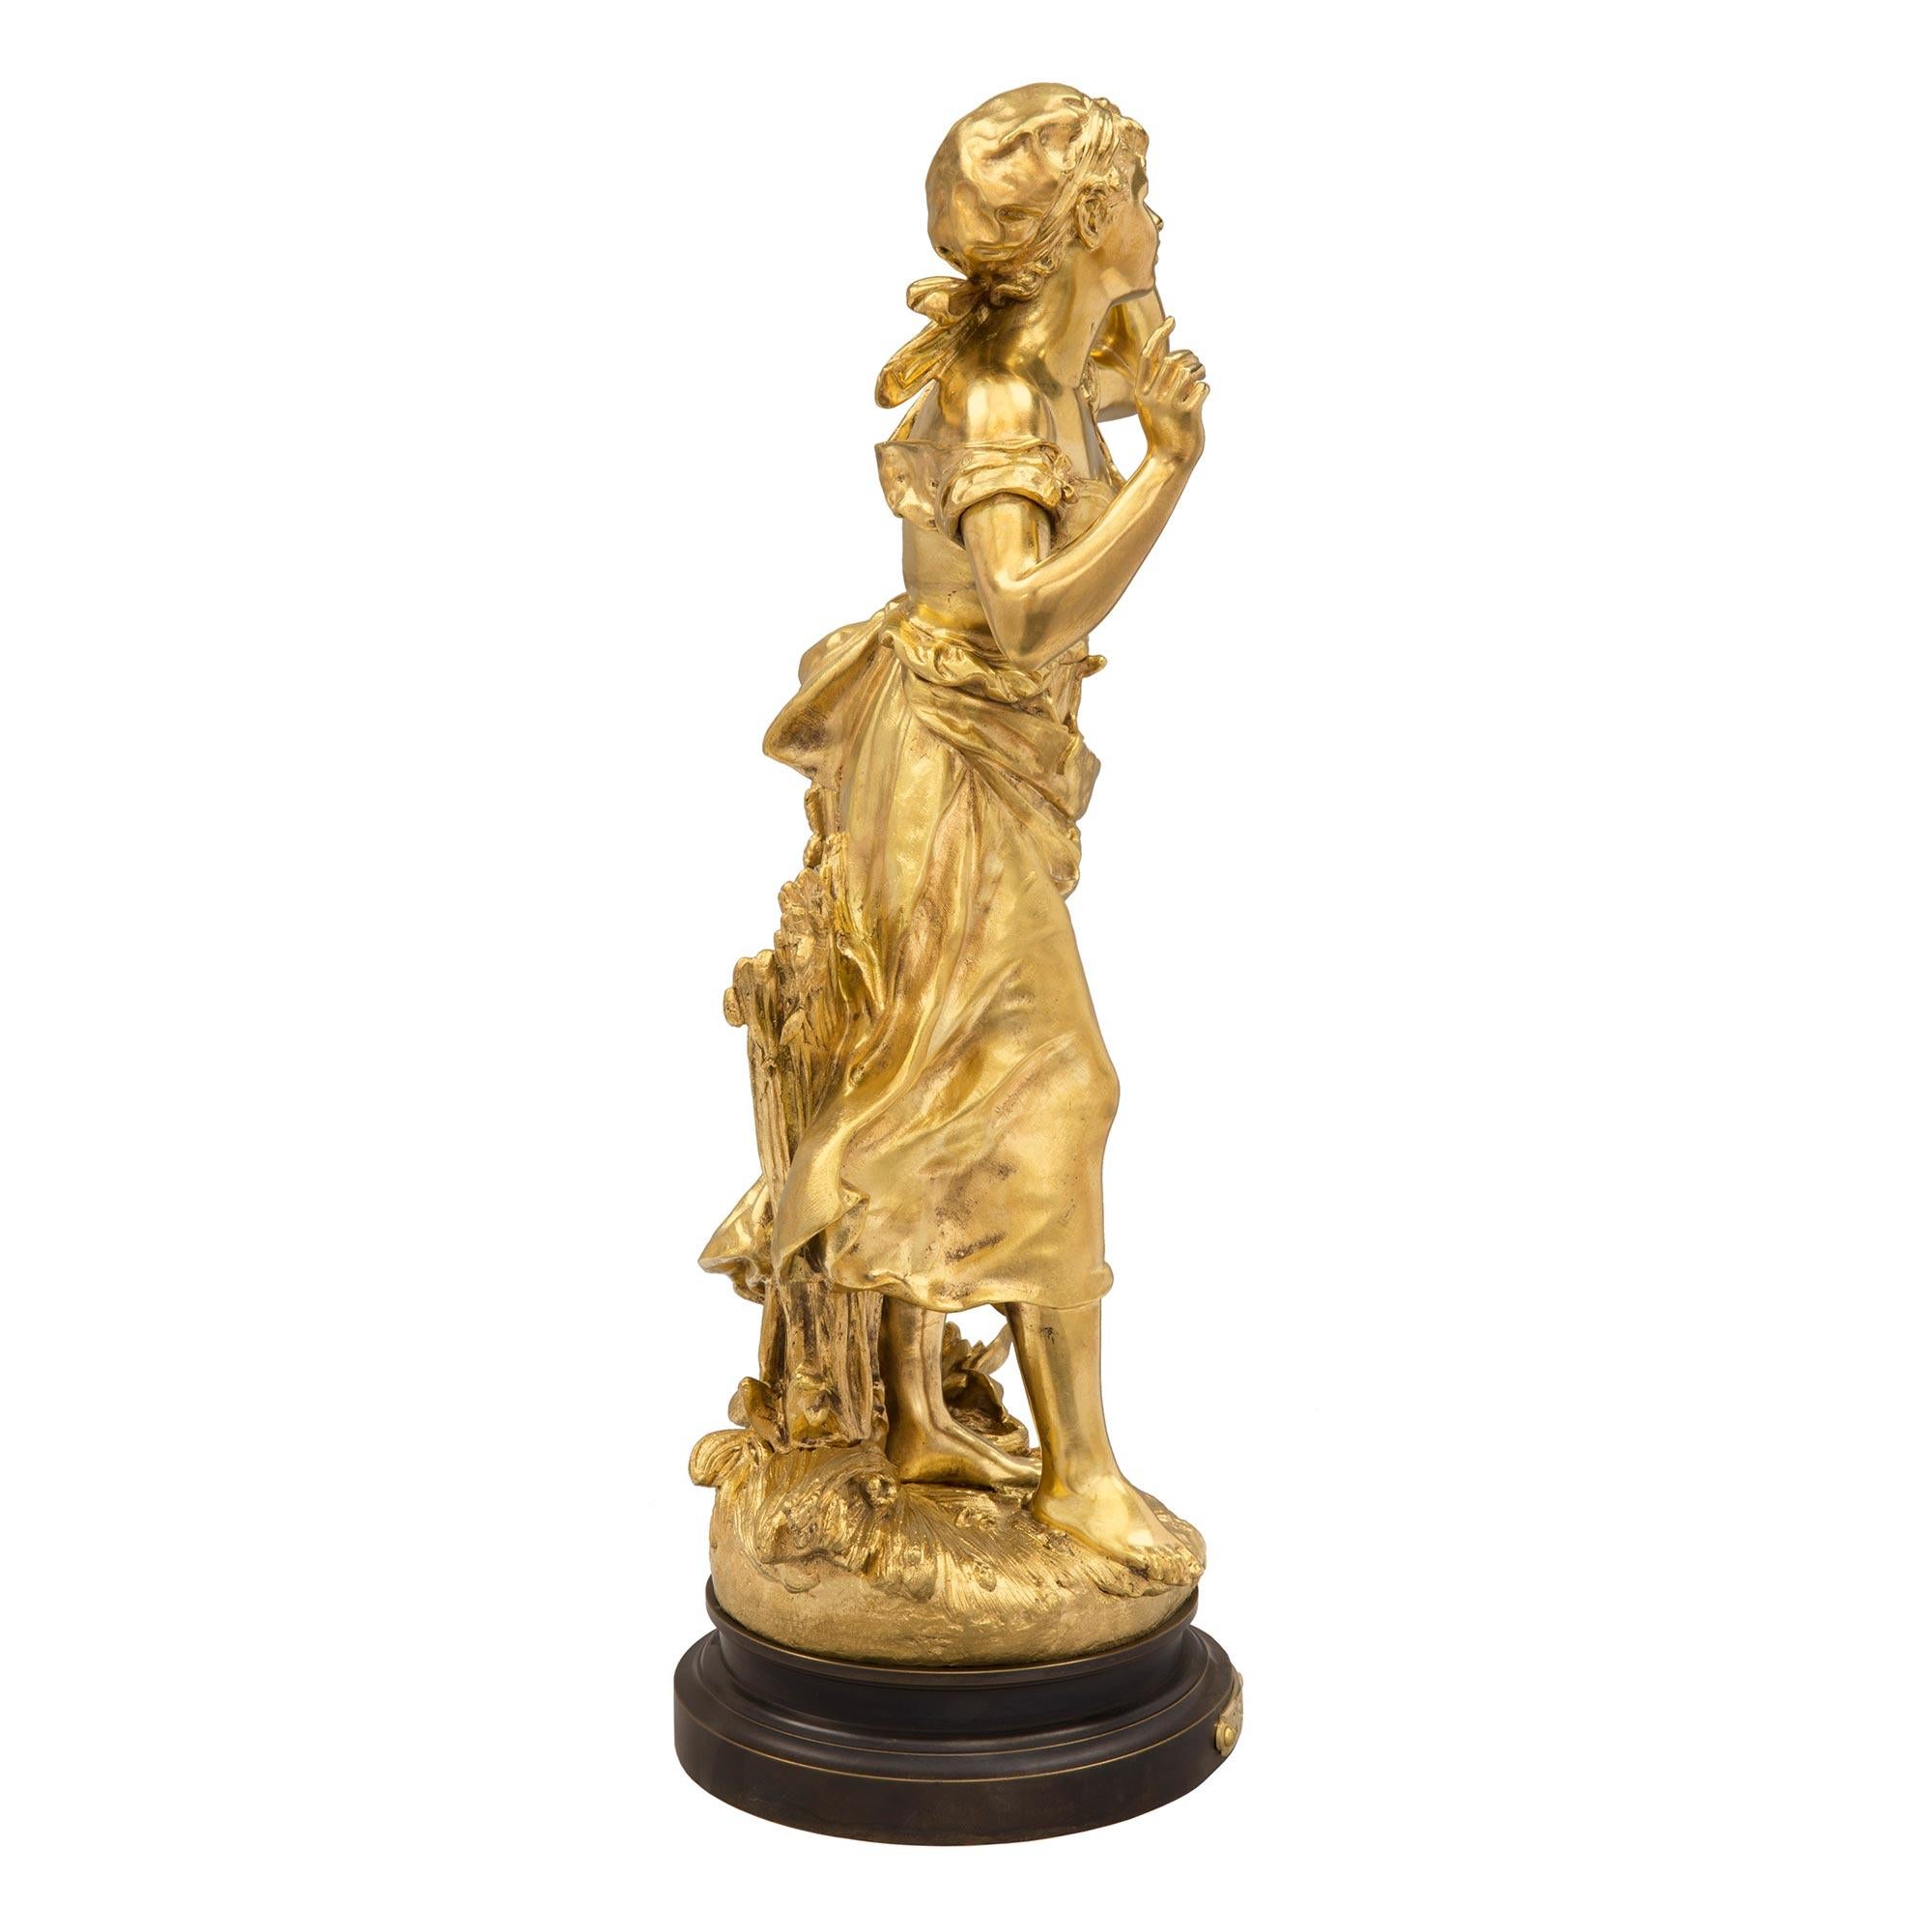 A beautiful French 19th century Louis XVI st. ormolu and patinated bronze statue named 